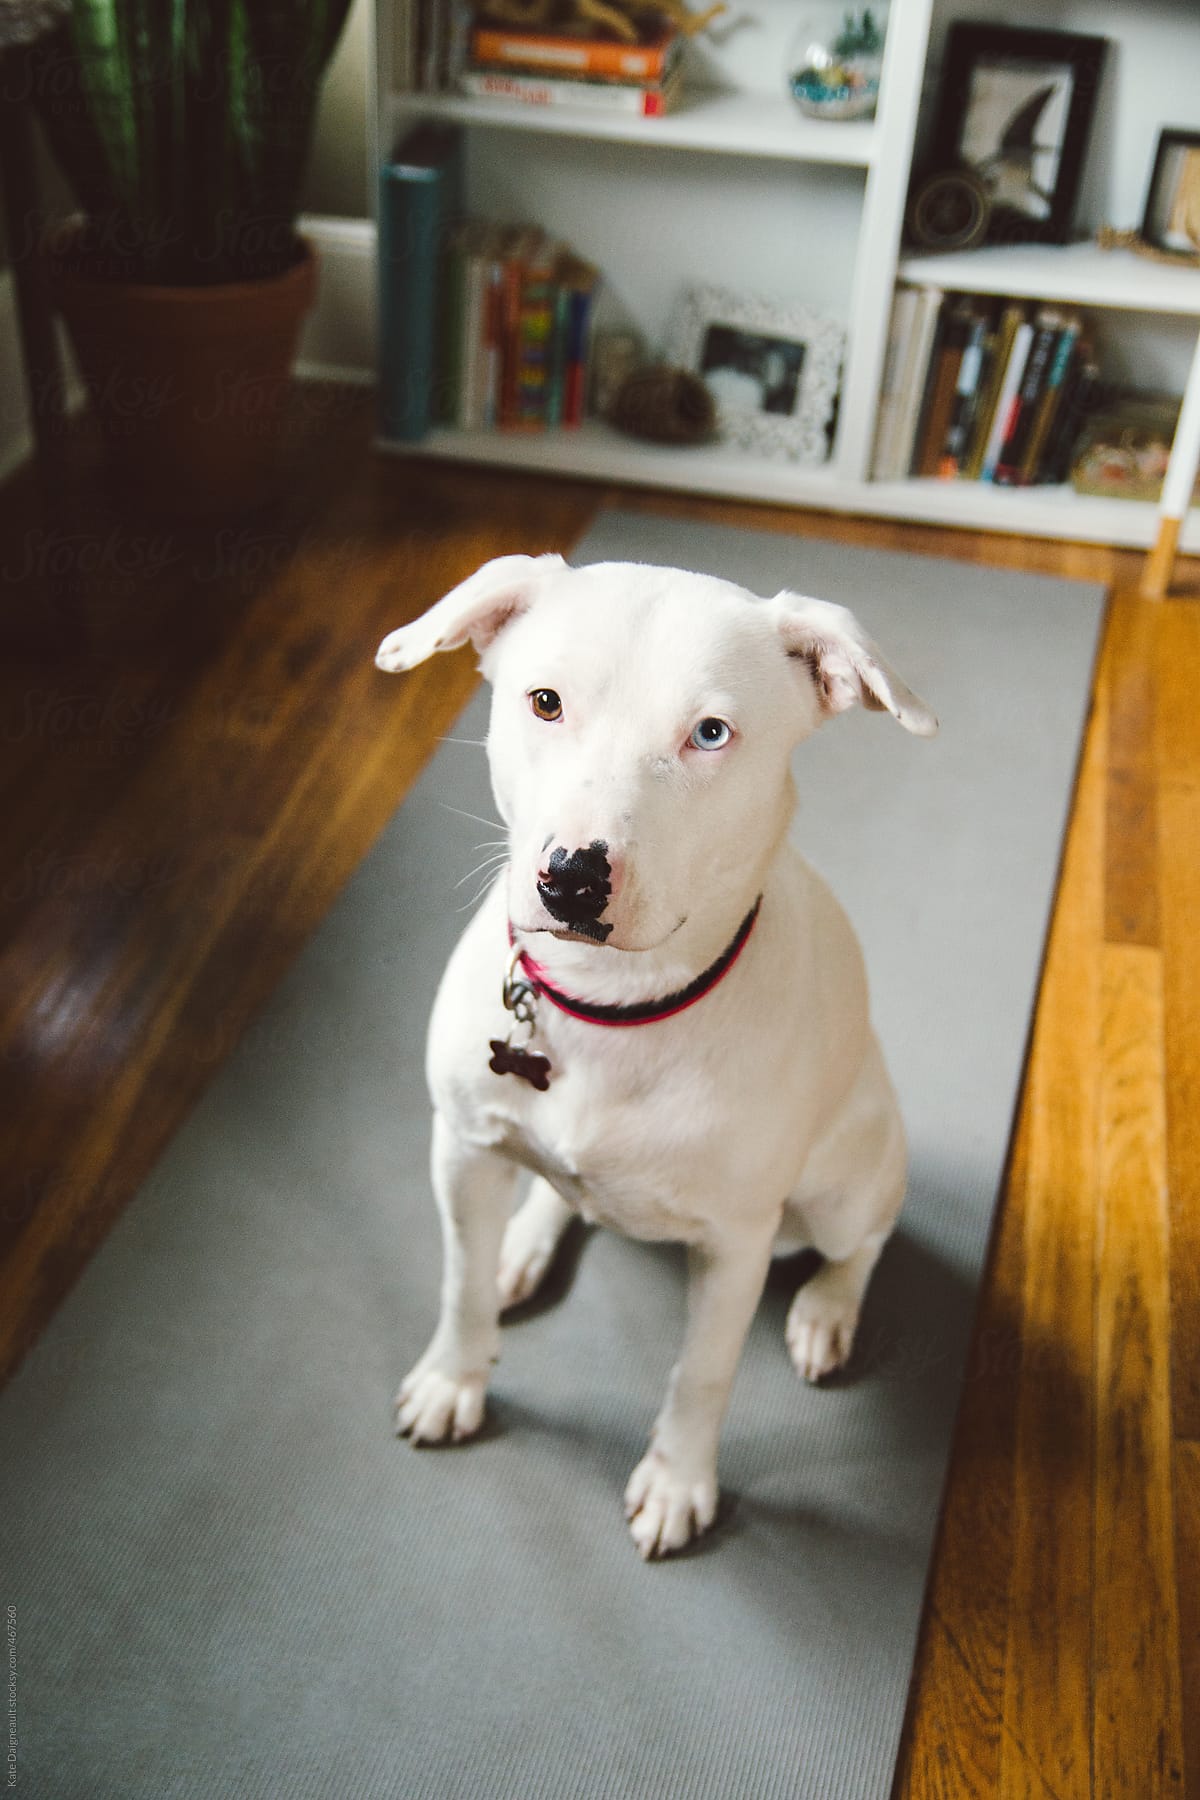 A cute white puppy sits patiently on a yoga mat in a living room